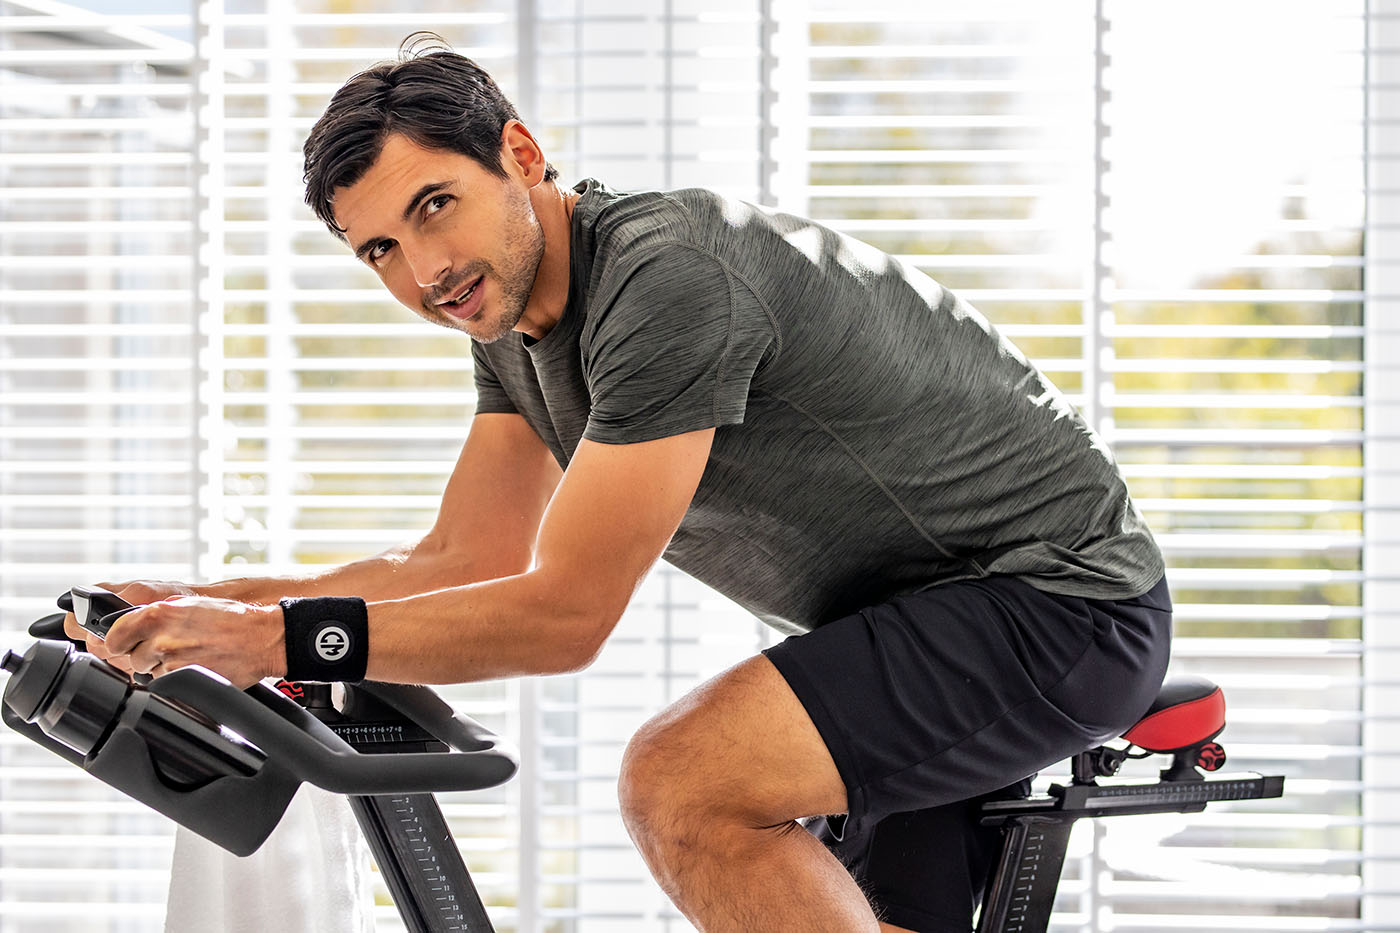 man on a indoor cycling bike